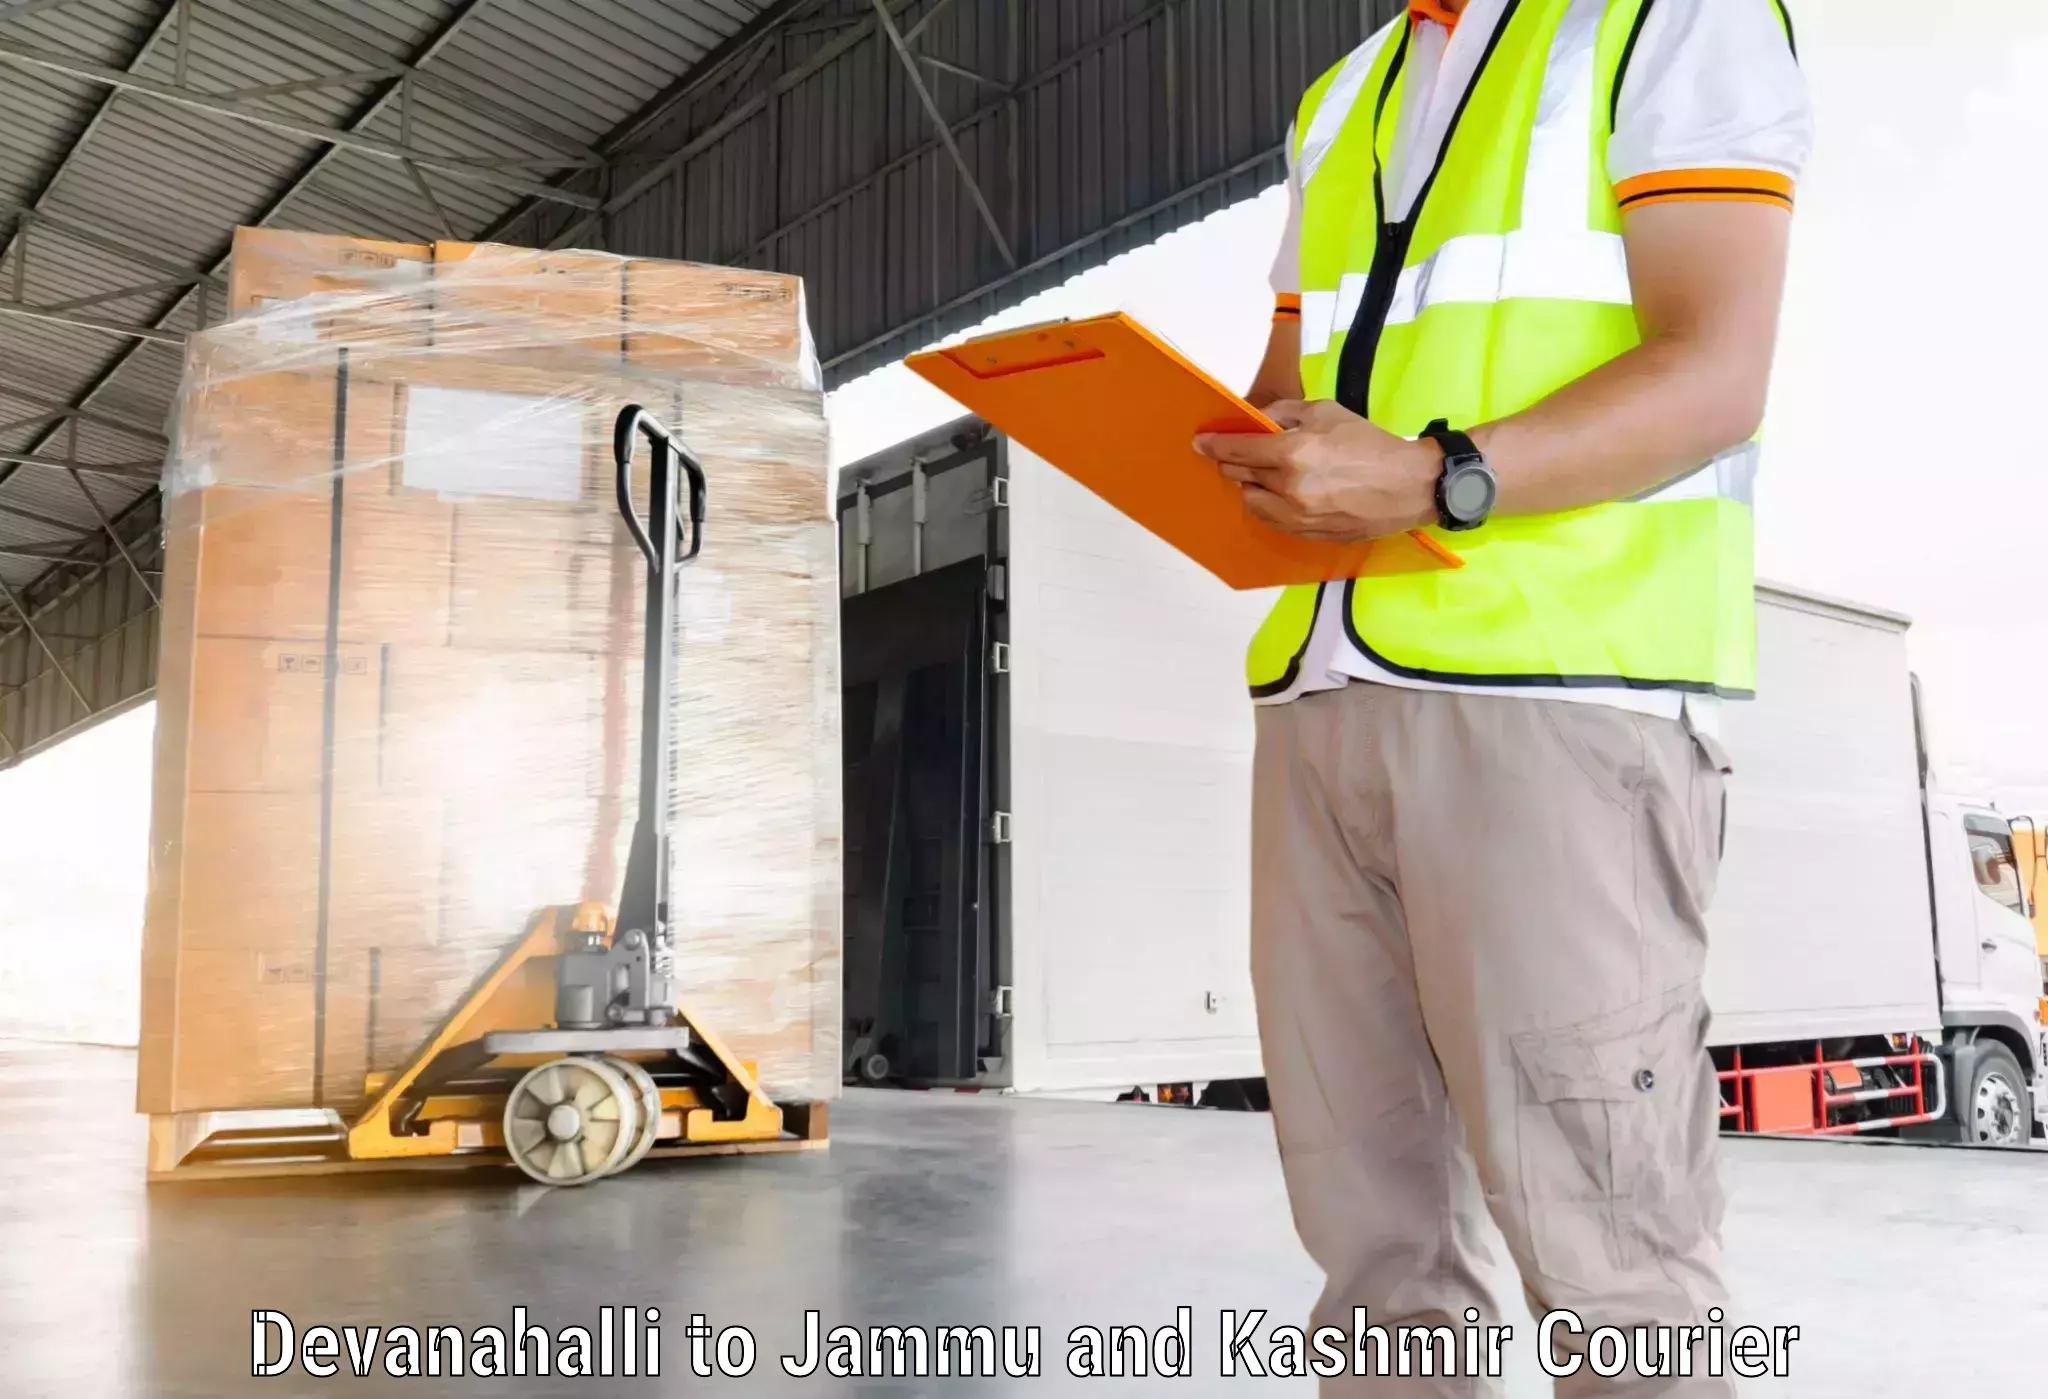 Subscription-based courier Devanahalli to Bandipur